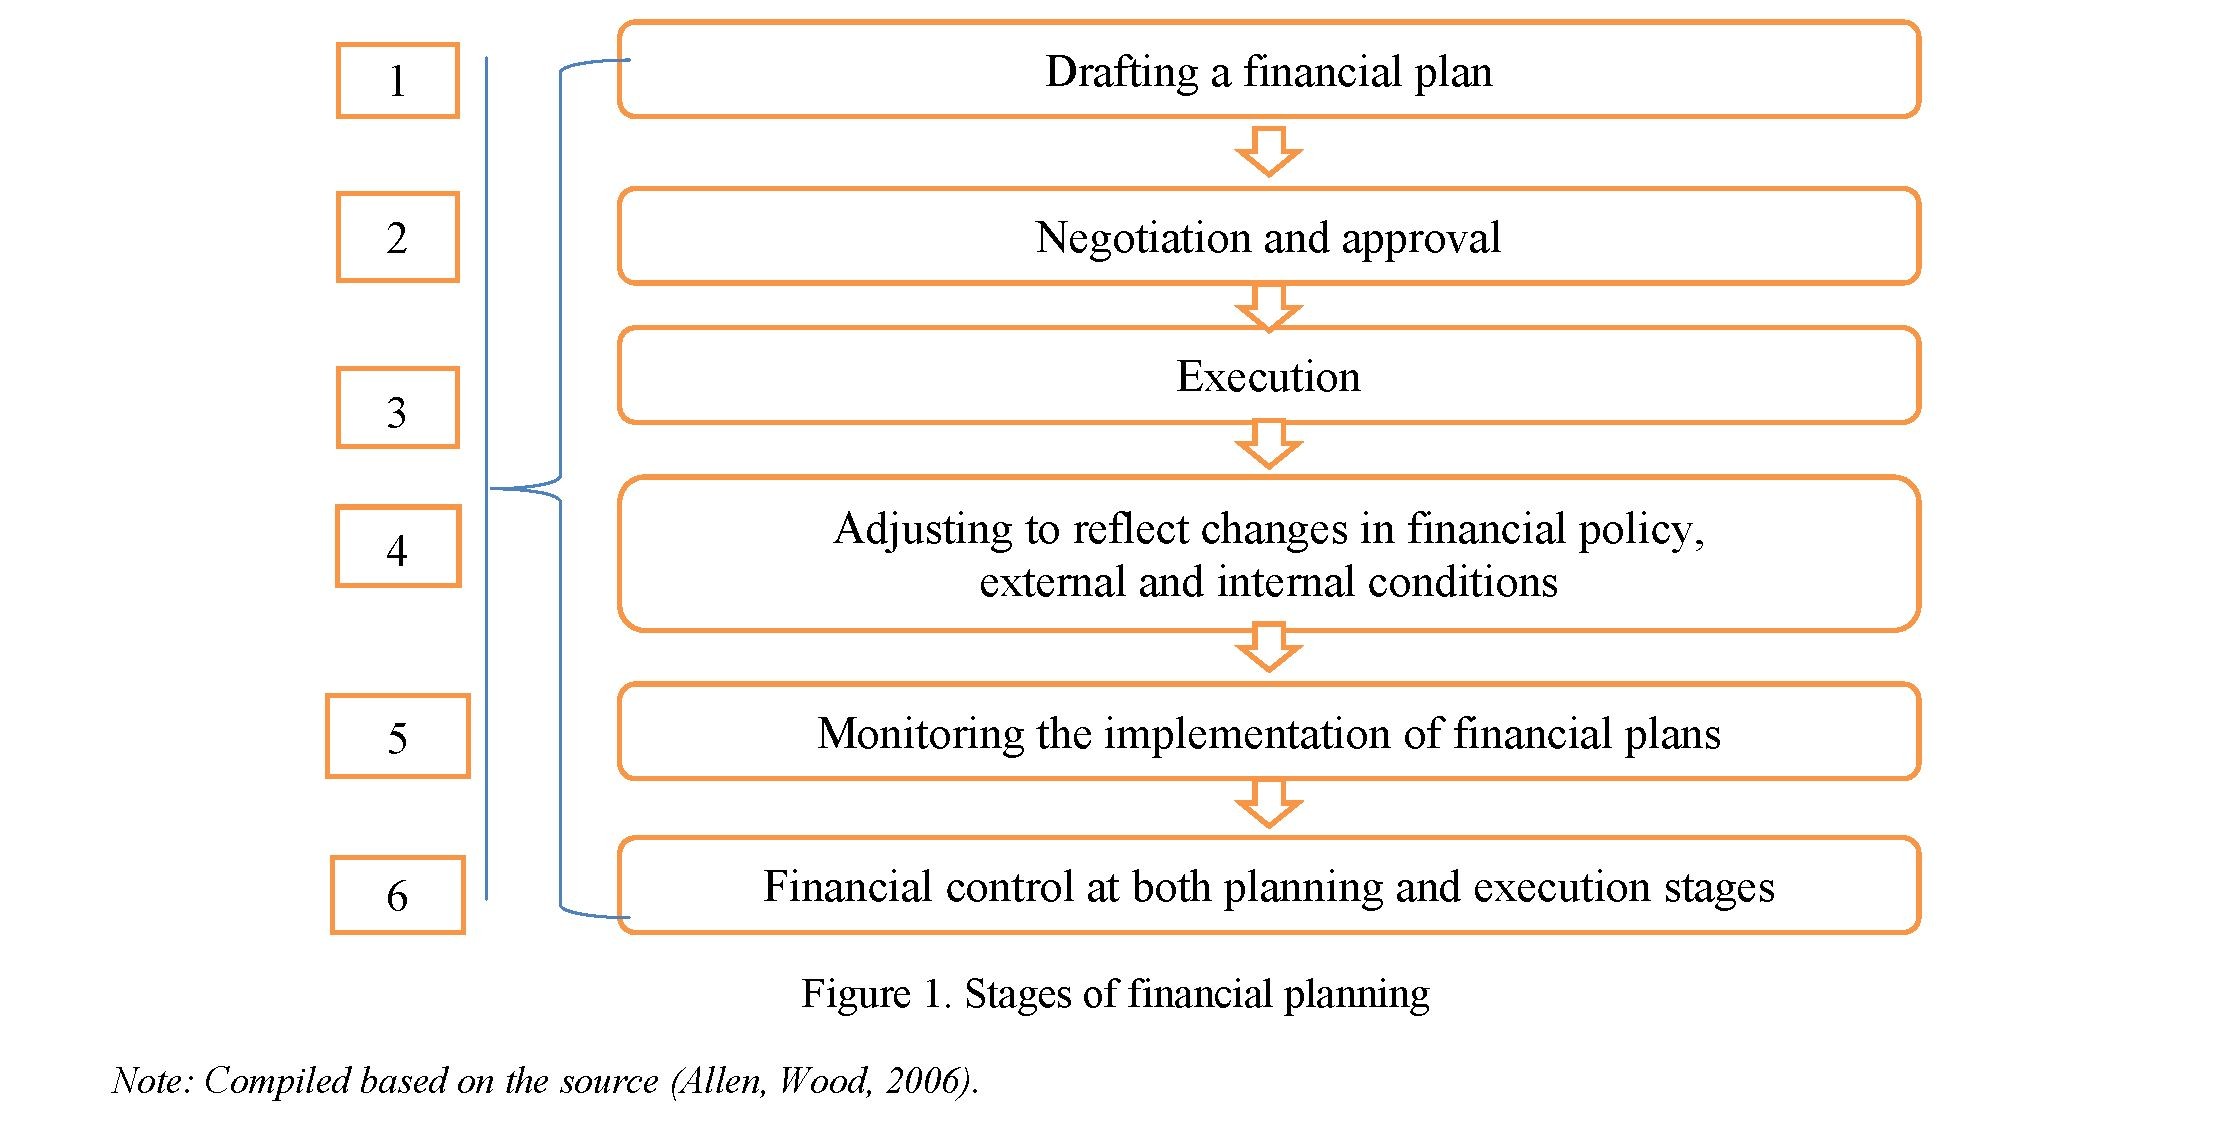 Financial planning as a tool for strengthening the company's financial stability